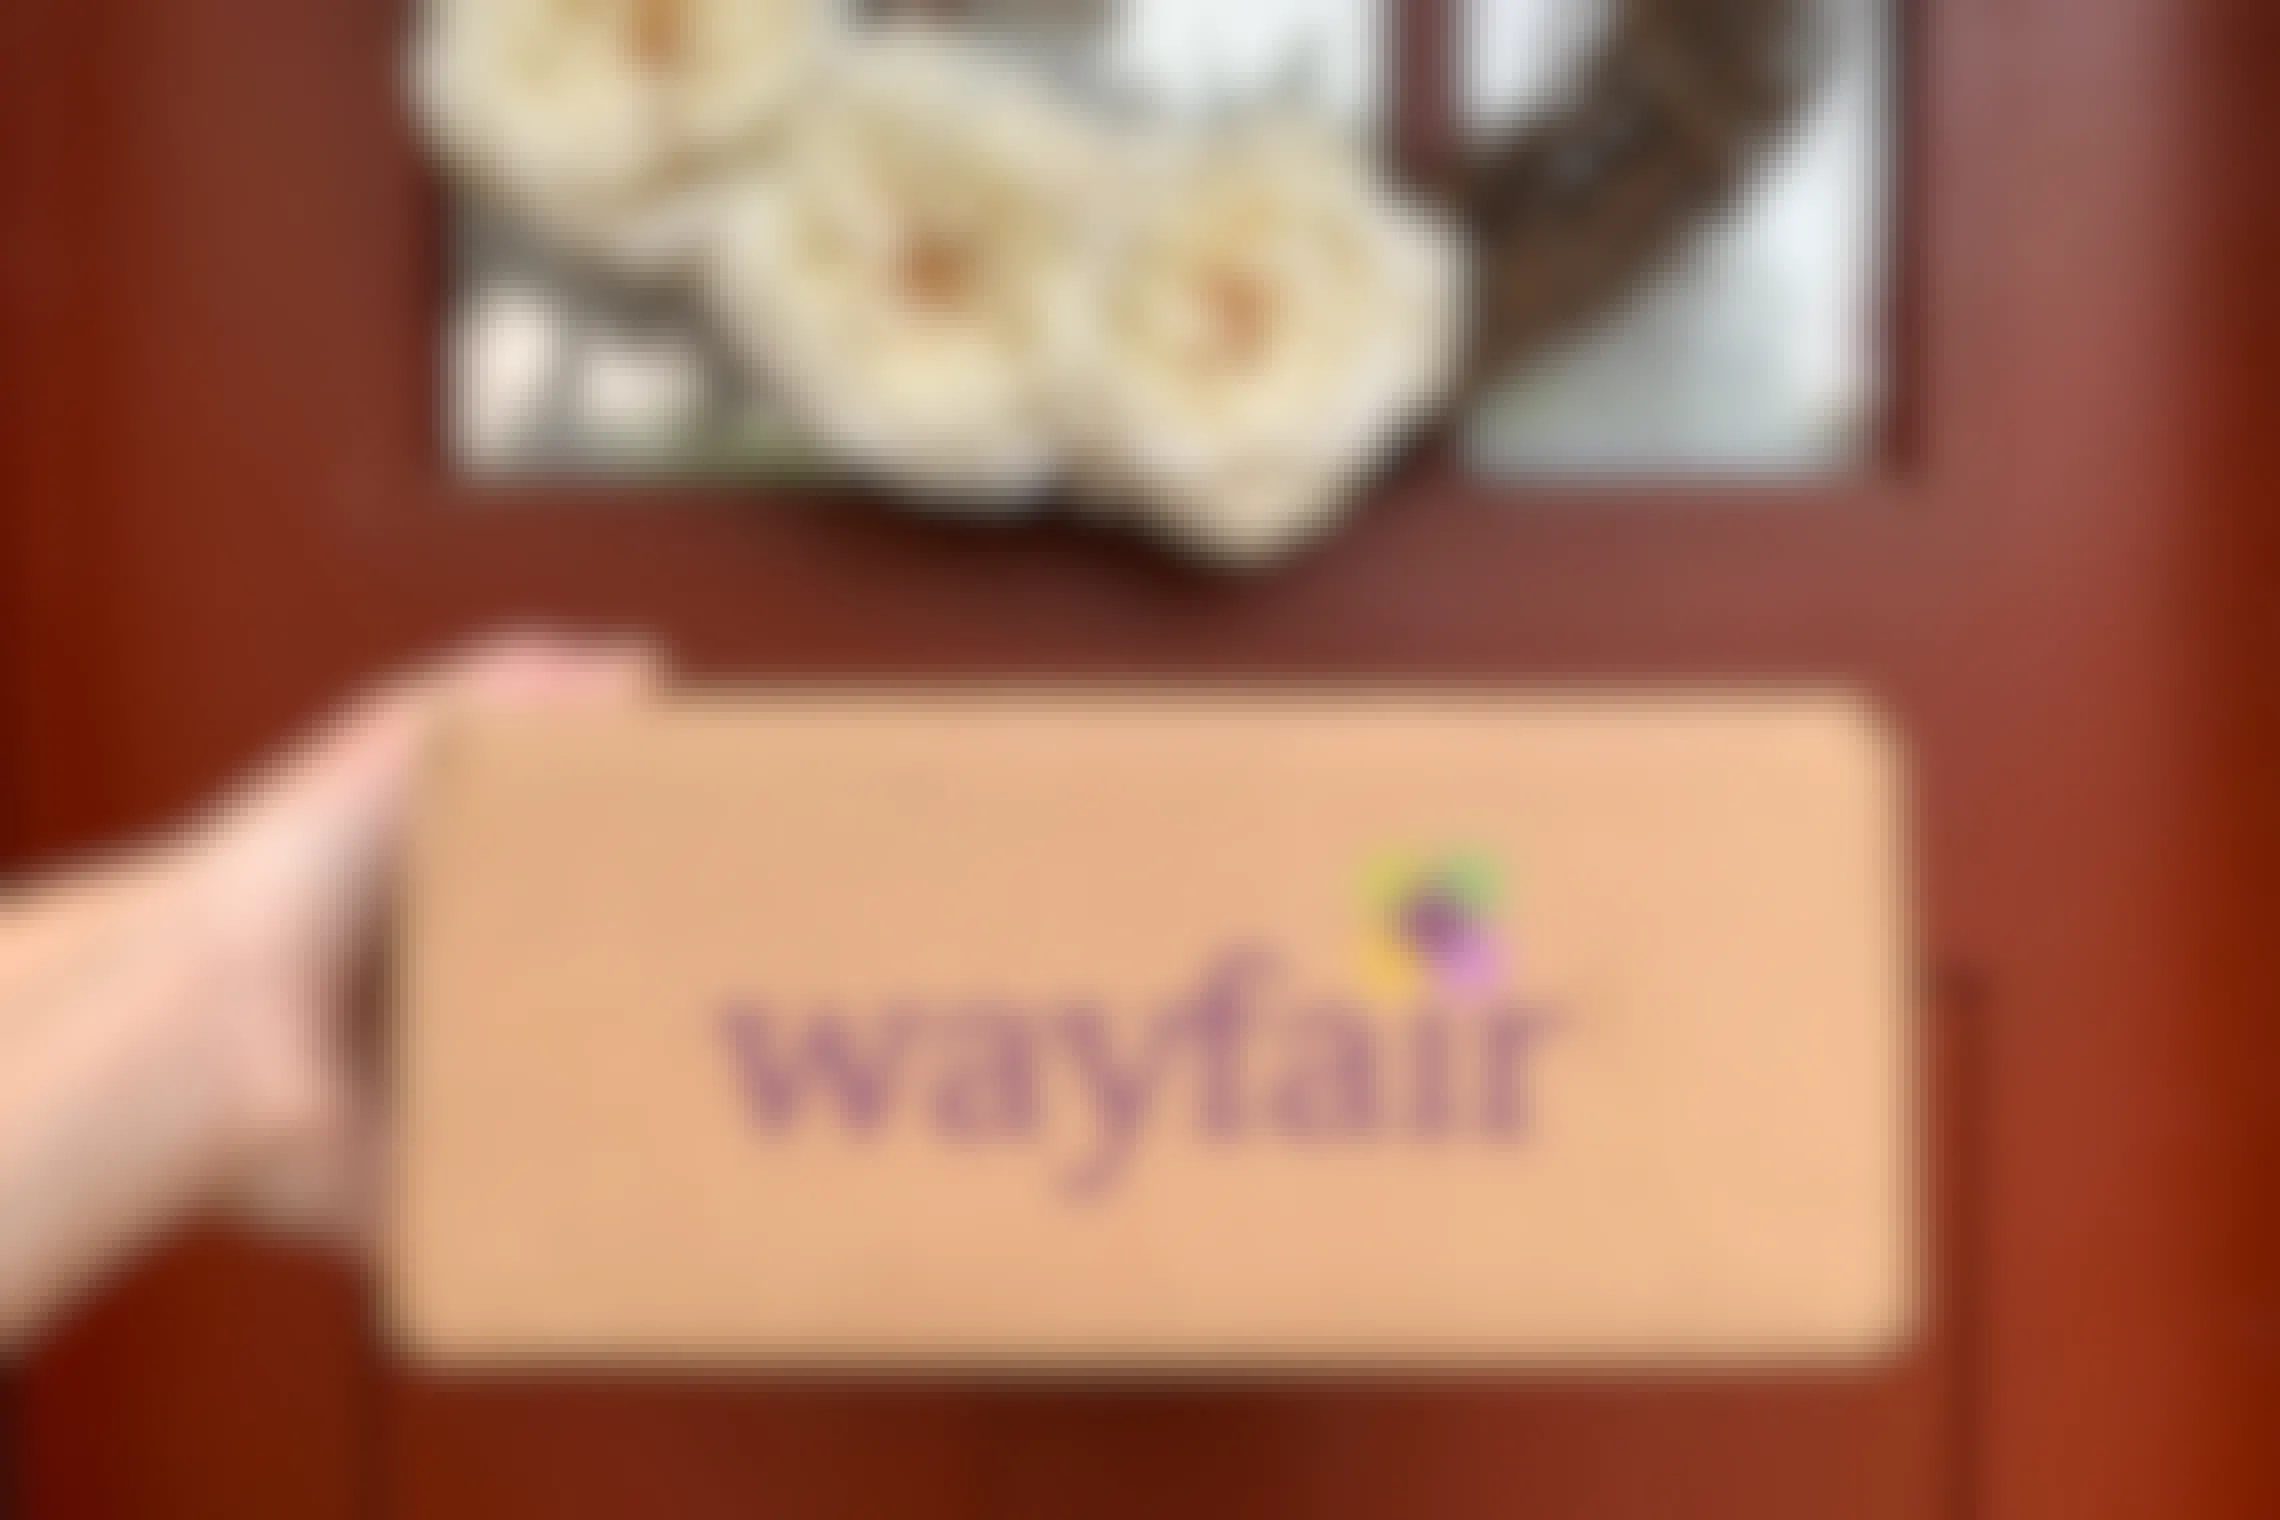 A person holding up a wayfair box in front of a front door